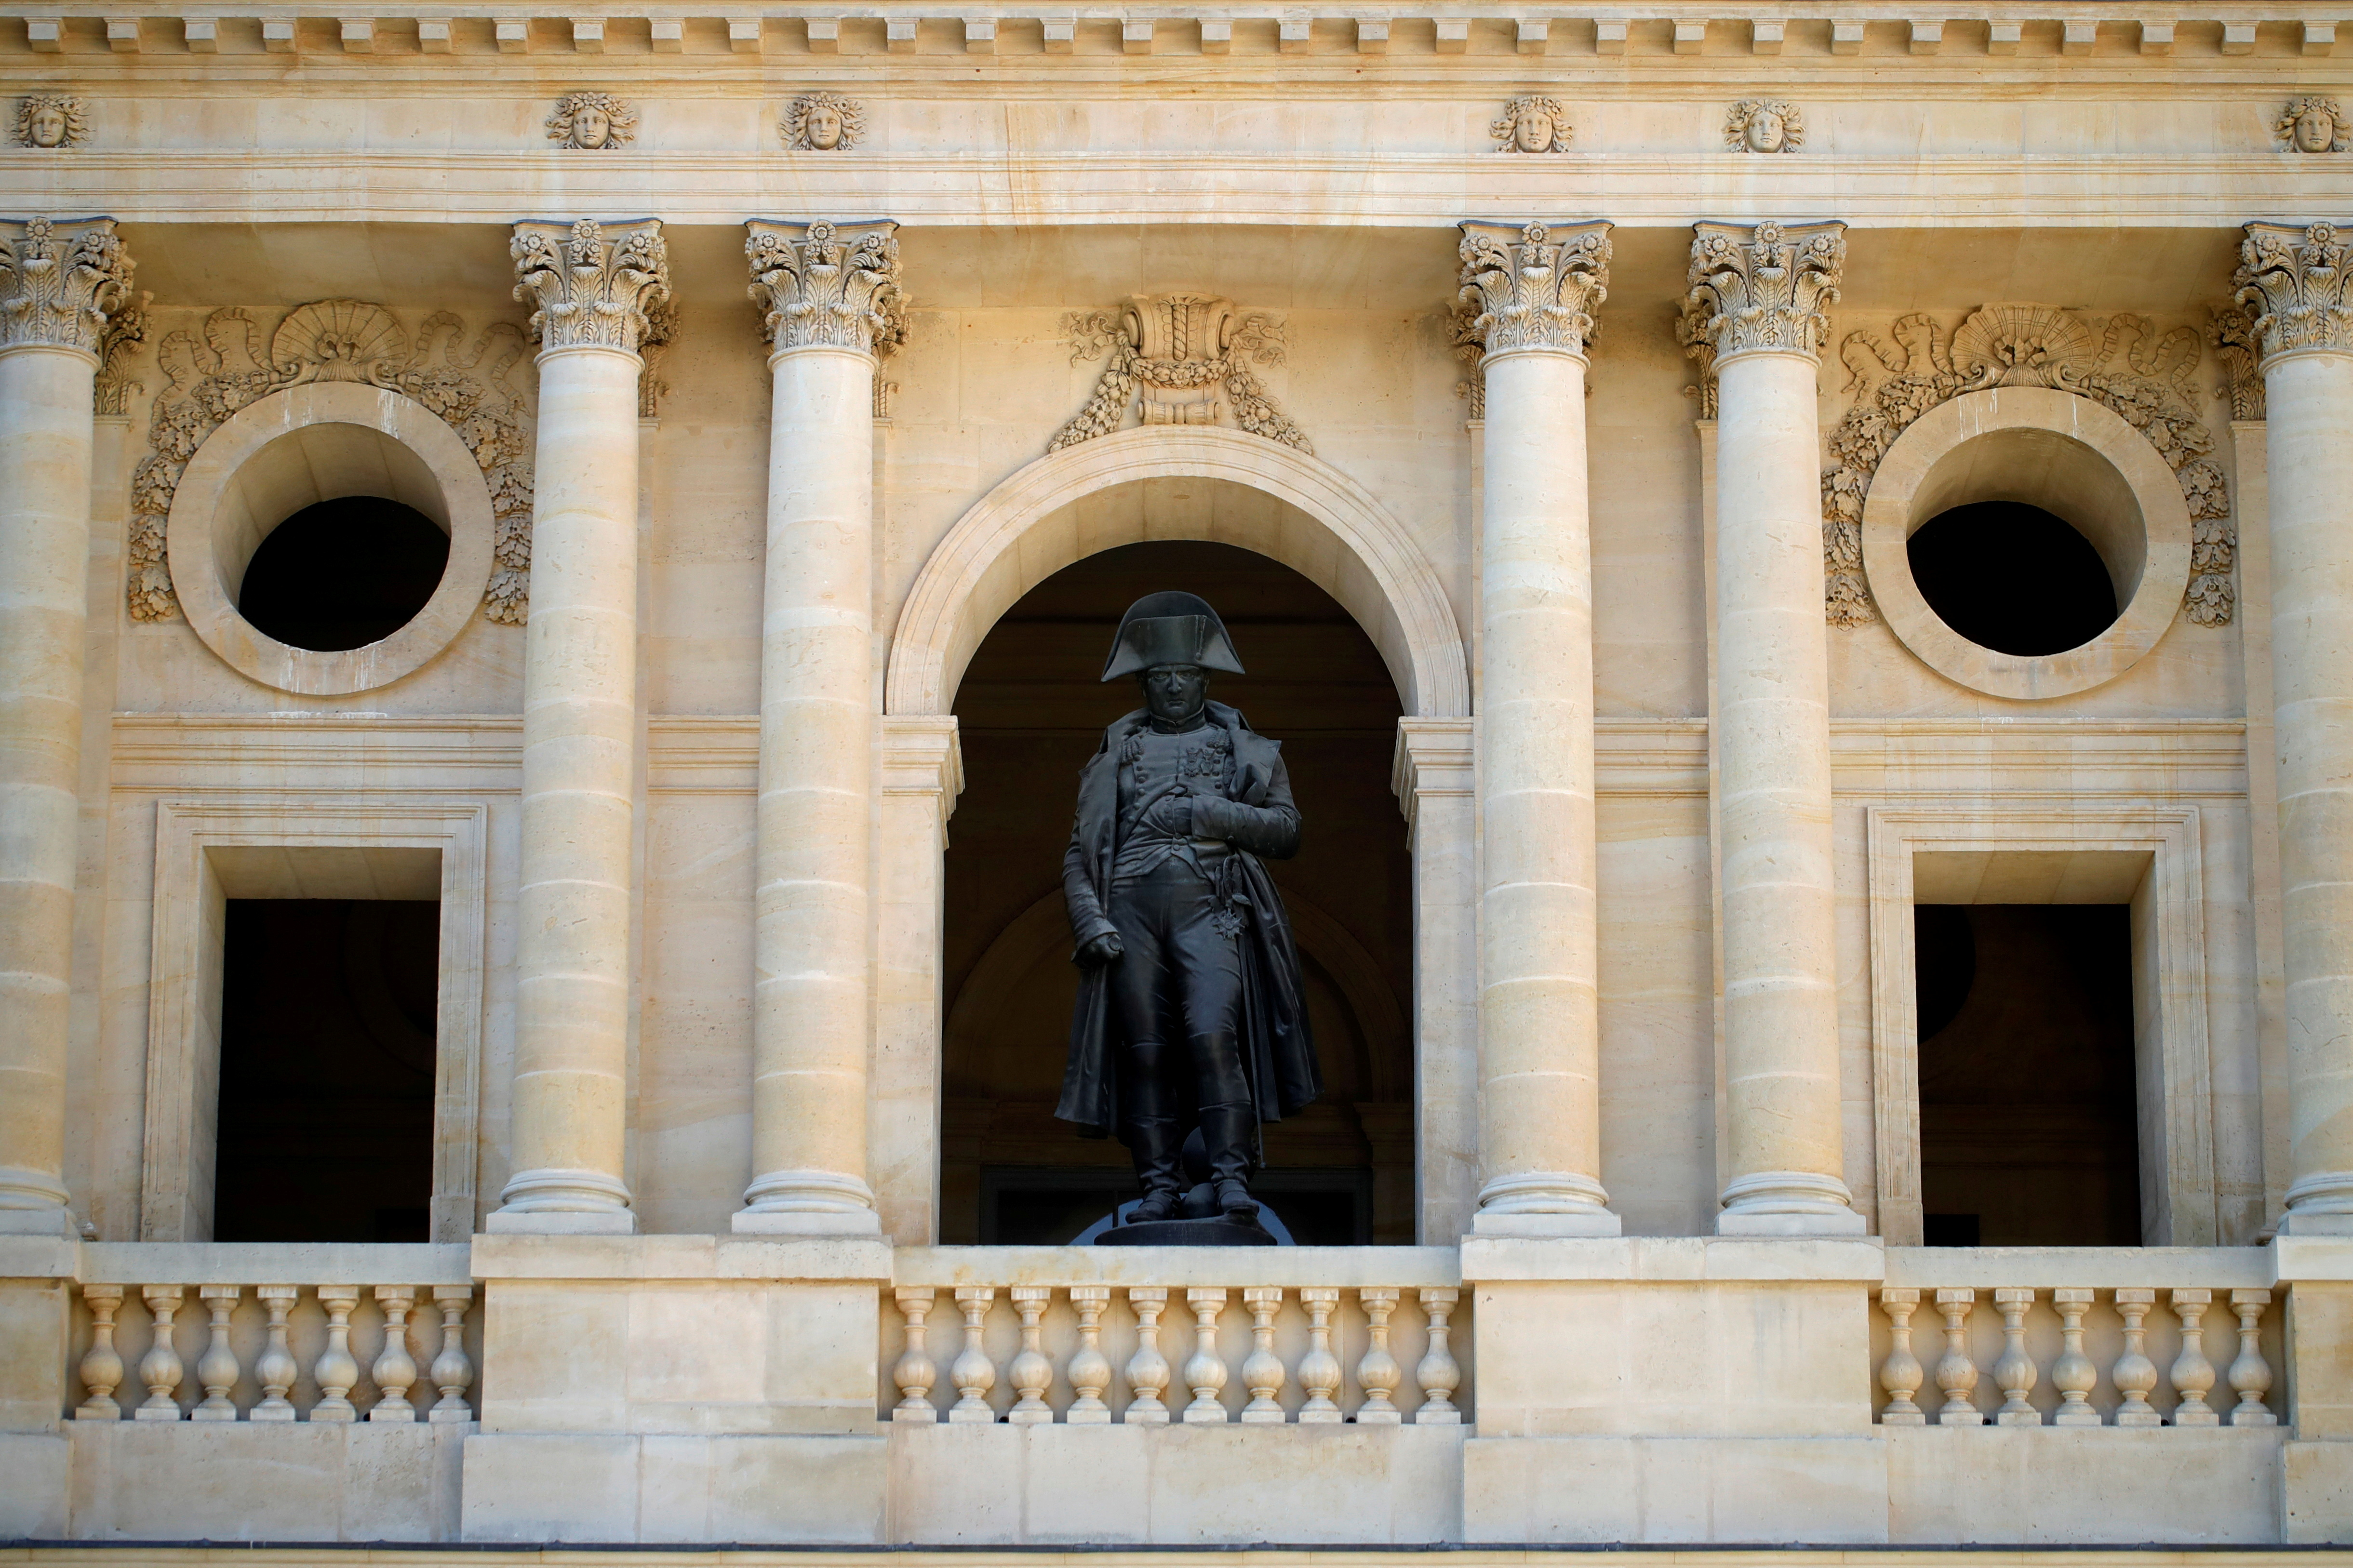 The statue of Napoleon I by sculptor Emile Seurre, made from 16 Russian and Austrian cannons captured from enemy armies in 1805, is seen in the courtyard at the Hotel des Invalides in Paris, France, April 28, 2021. REUTERS/Sarah Meyssonnier/File Photo